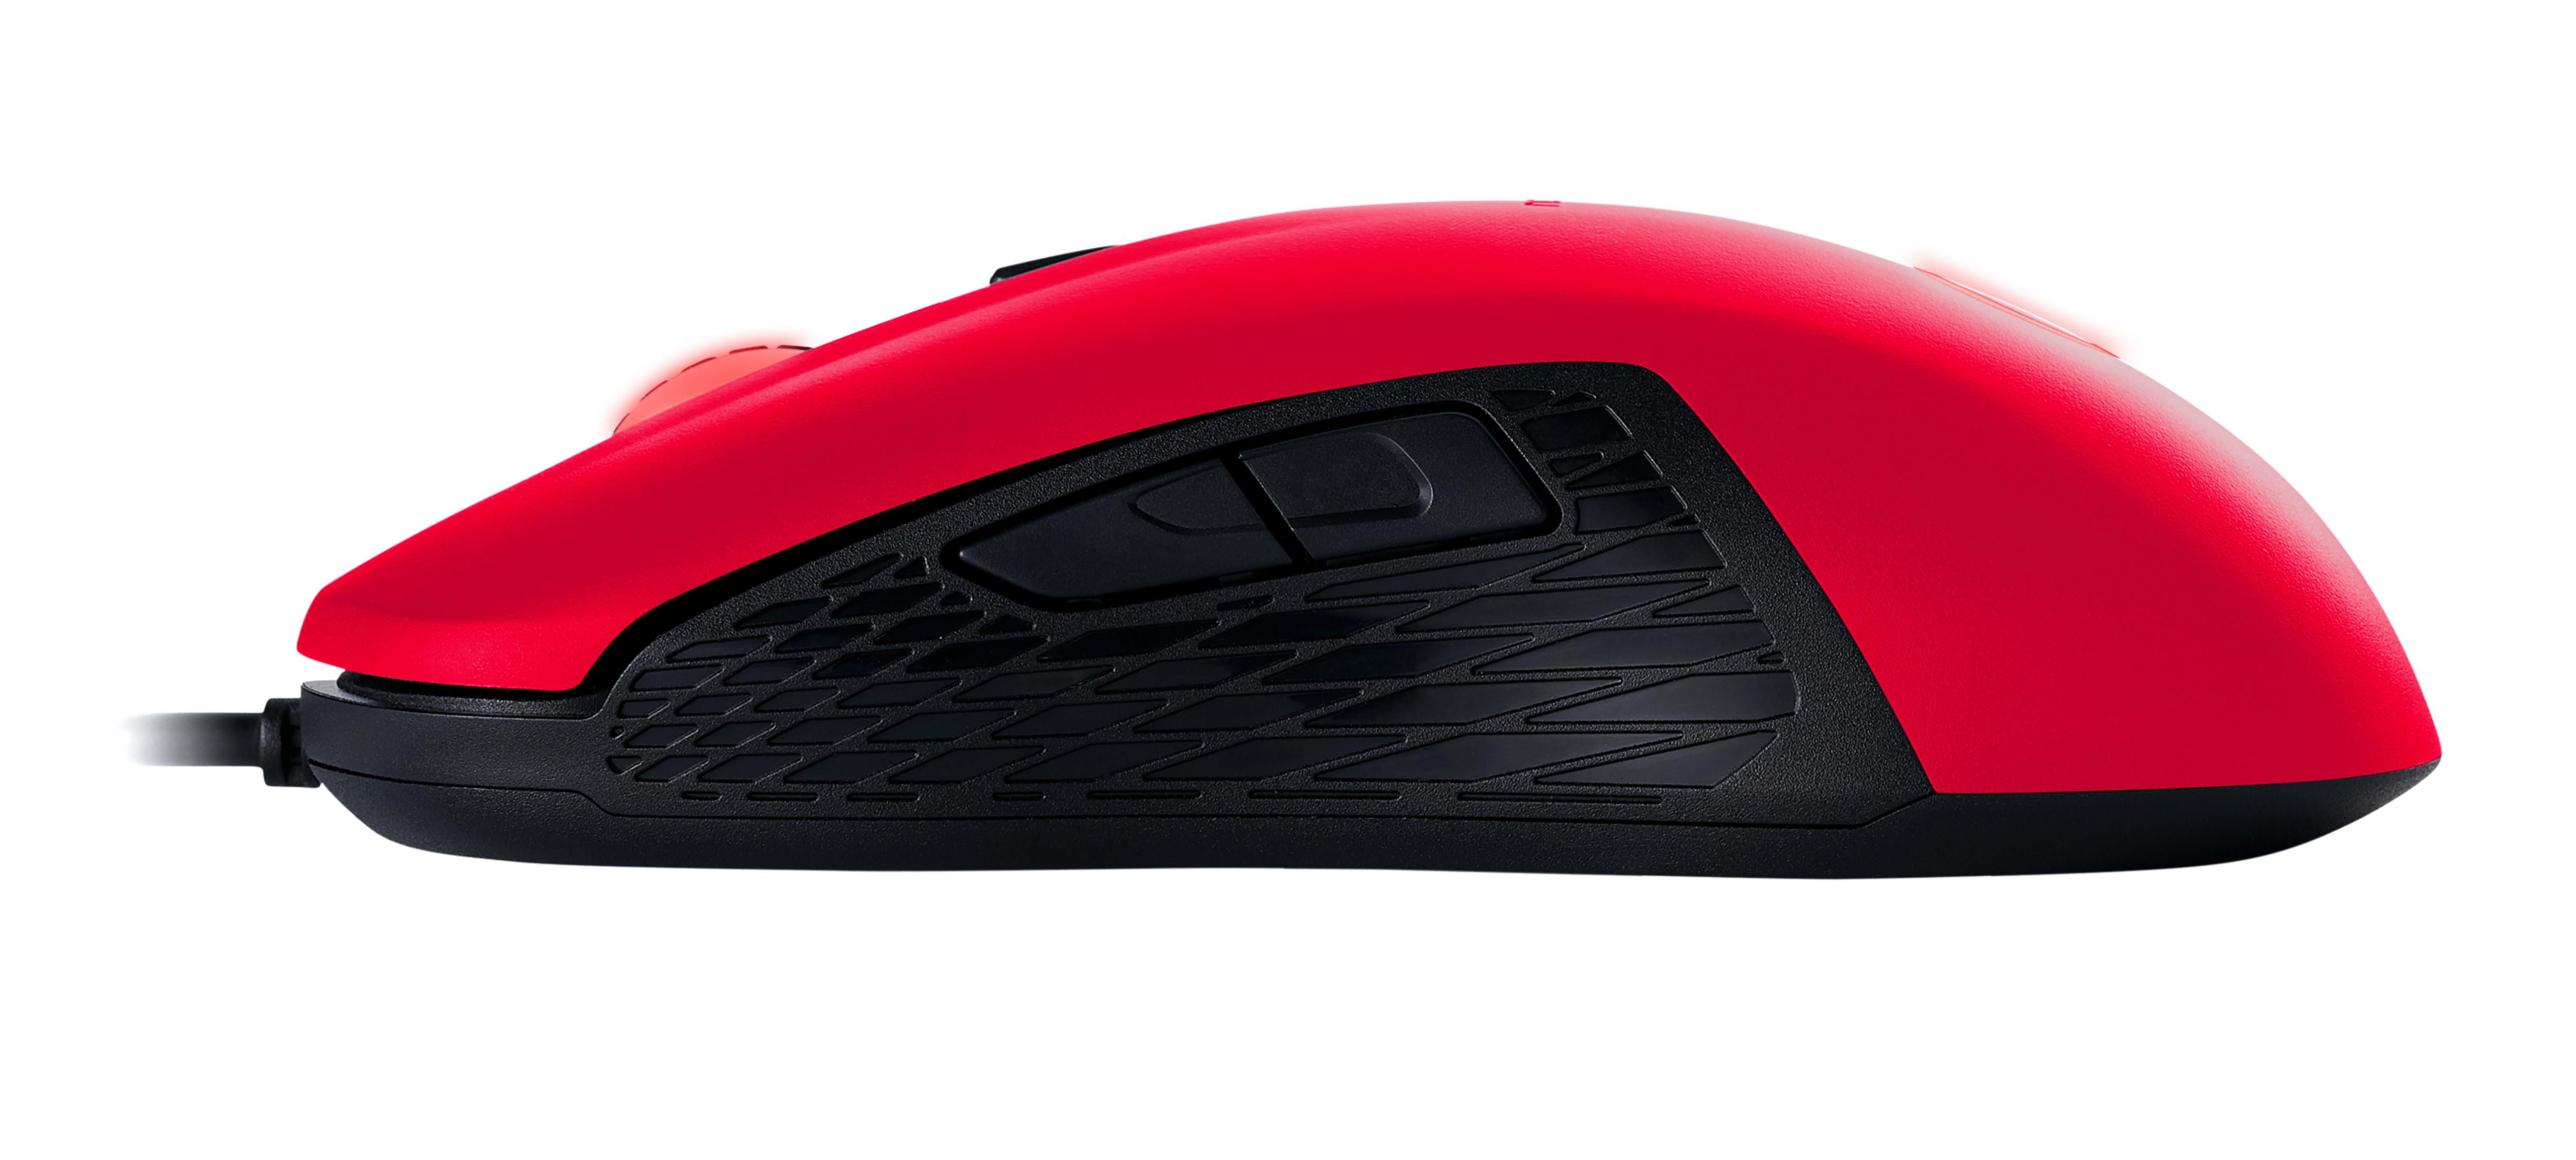 GAMING NACON PC NA374445 RED GM-110 MOUSE Maus, Rot